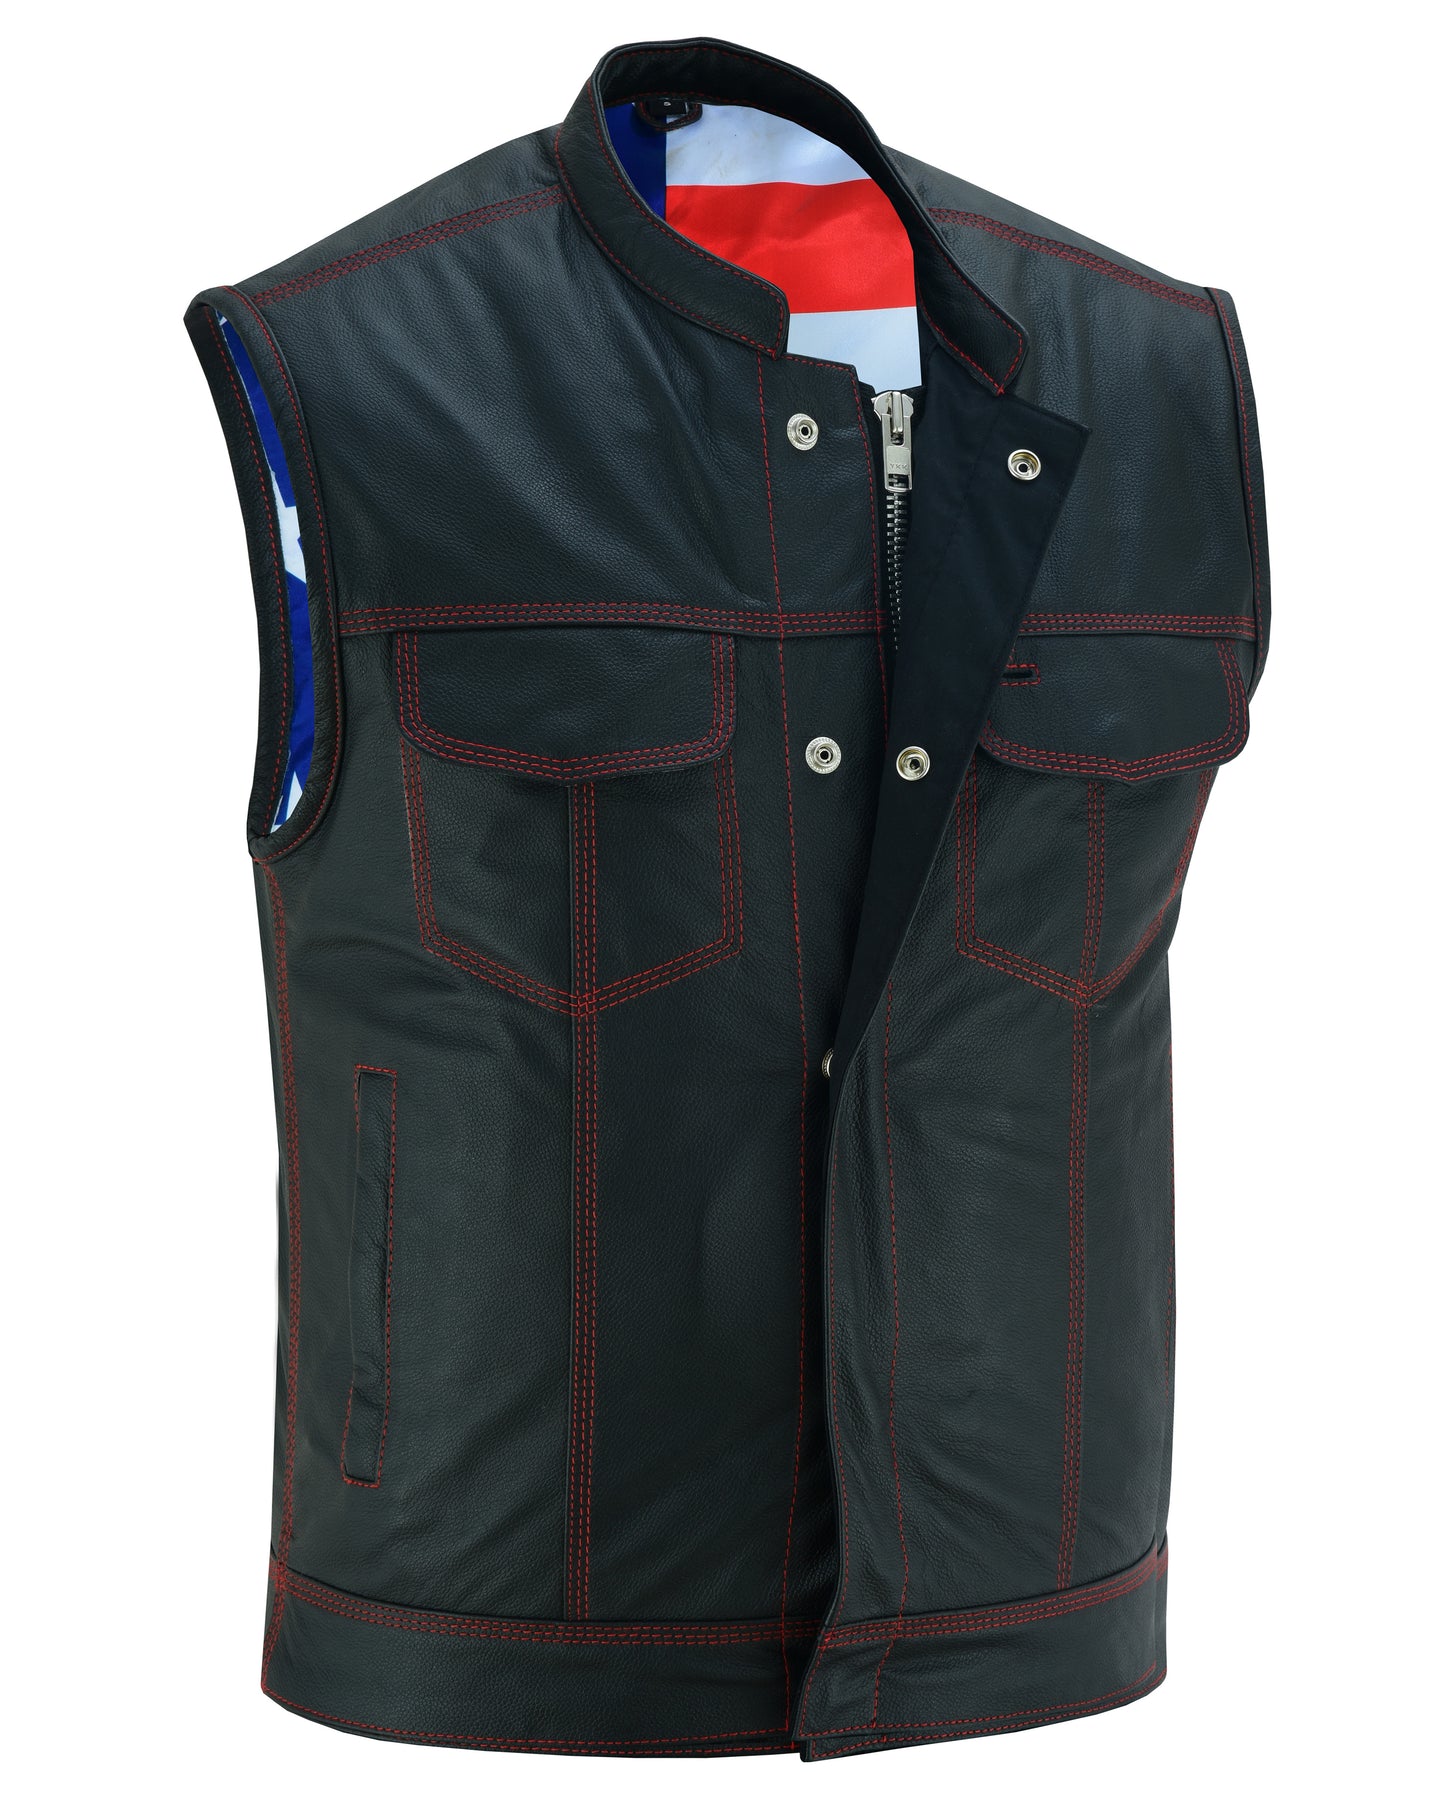 Men’s Leather Vest With Red Stitching And USA Inside Flag Lining With Scoop Collar